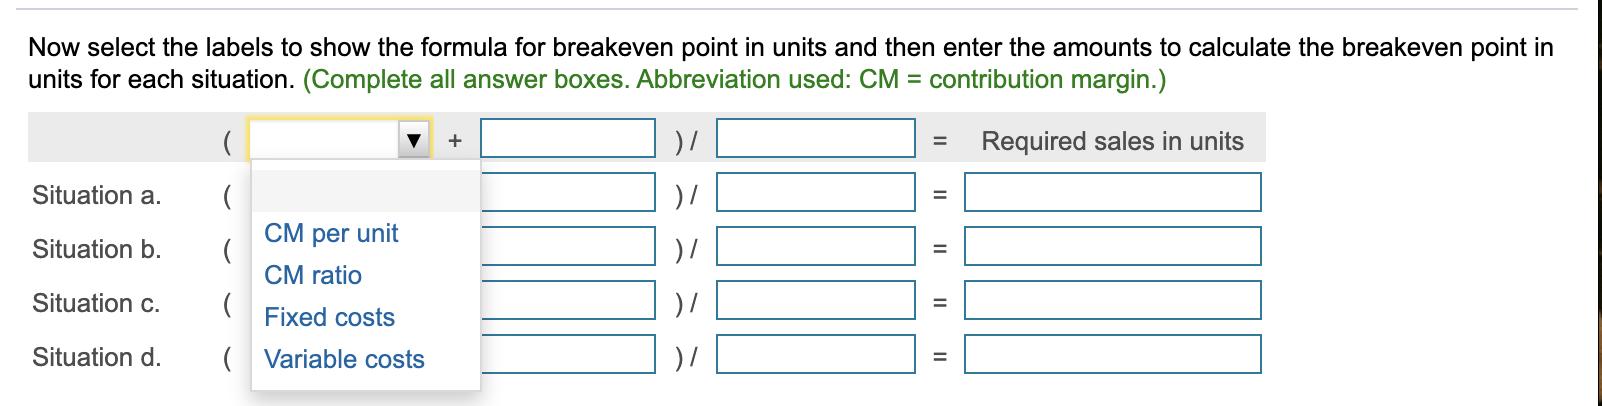 Now select the labels to show the formula for breakeven point in units and then enter the amounts to calculate the breakeven